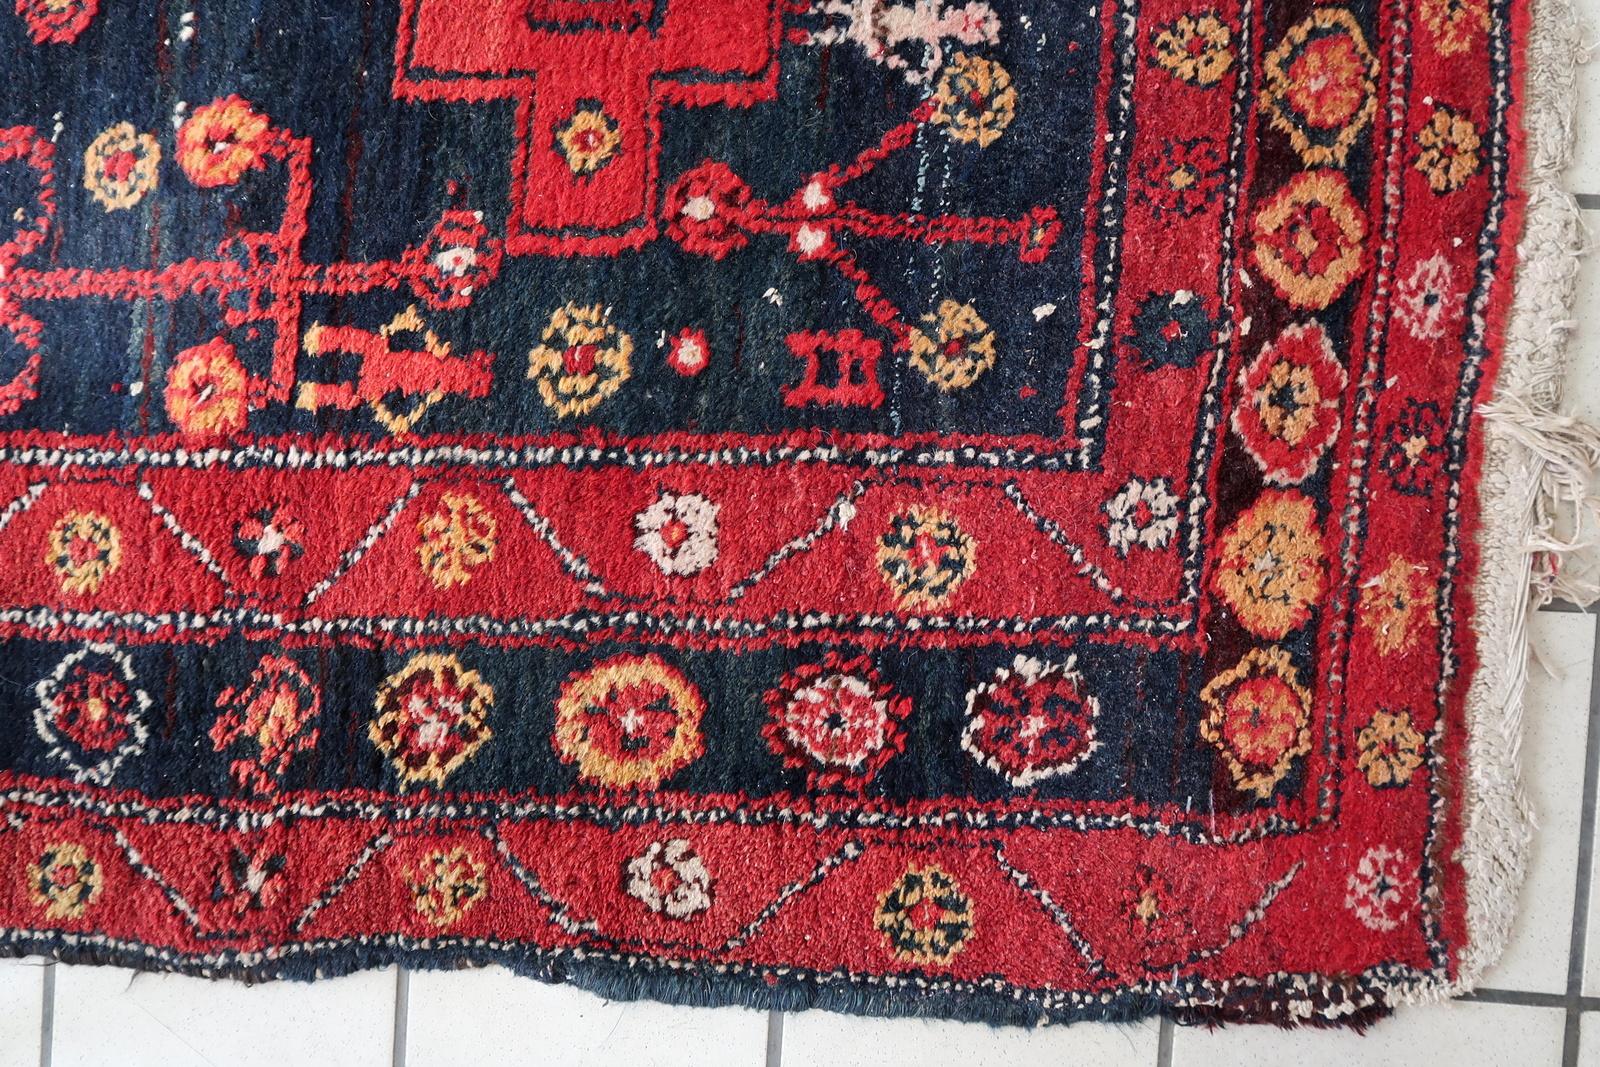 A Glimpse into History with our Antique Persian Hamadan Rug

Transport your living space to a bygone era with our Handmade Antique Persian Hamadan Rug, a true testament to the artistry of the 1930s. Measuring 4.6' x 6.7' (142cm x 205cm), this